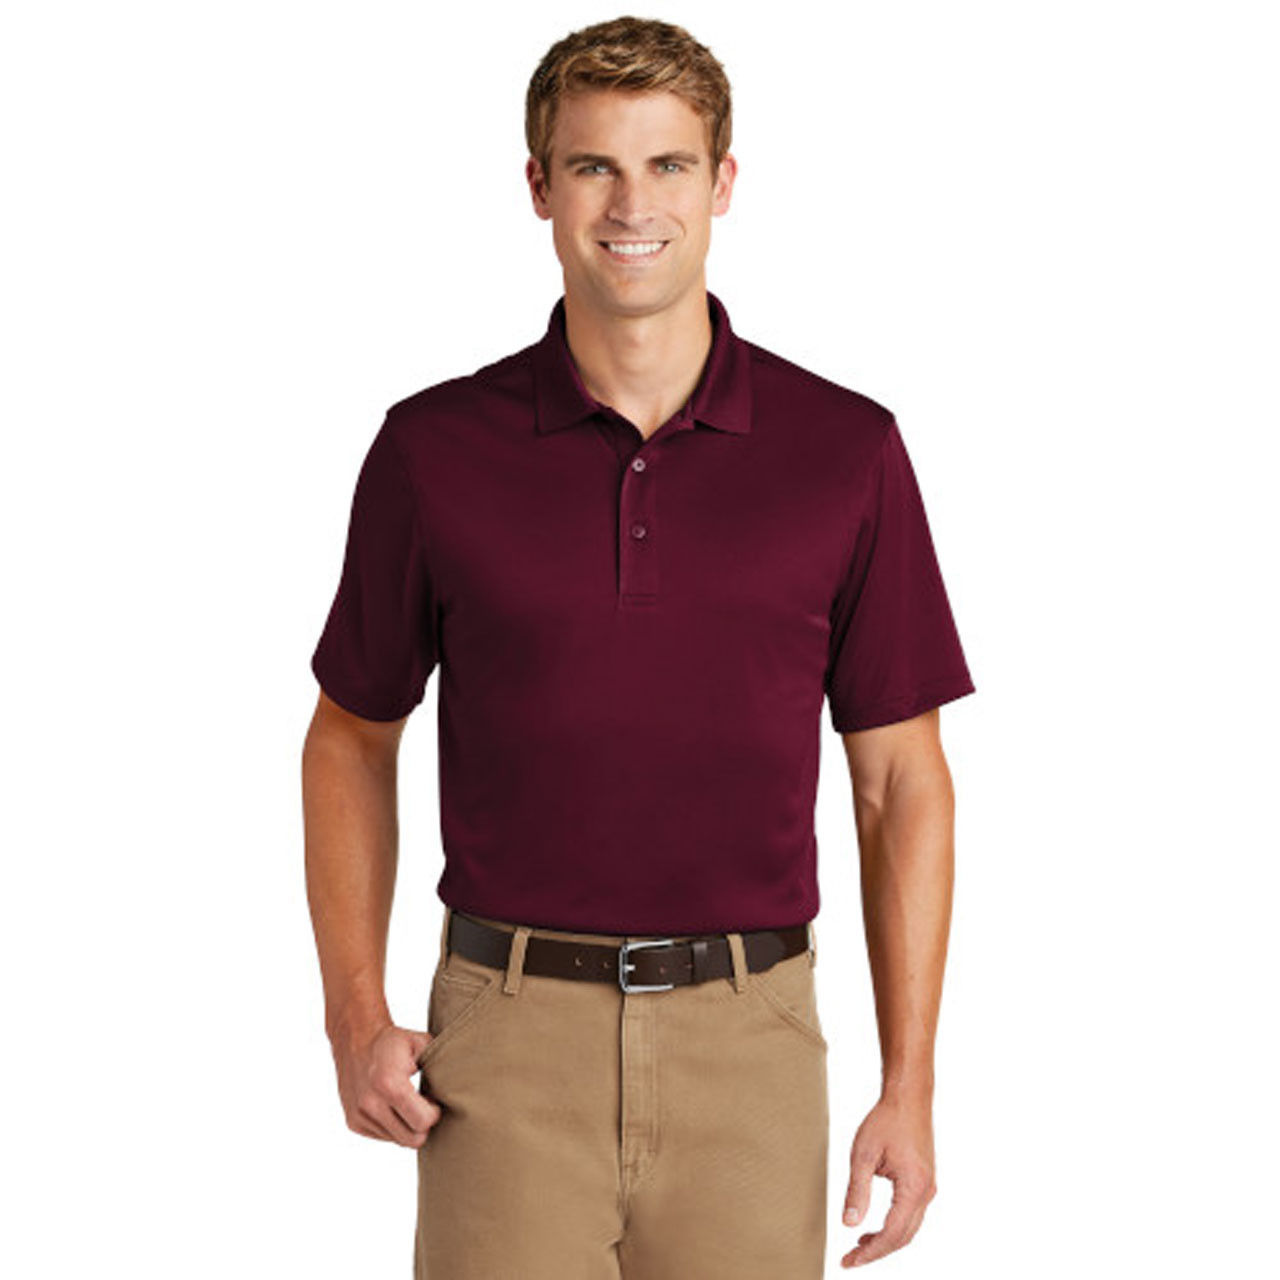 What is the model number of the men's maroon polo shirt?